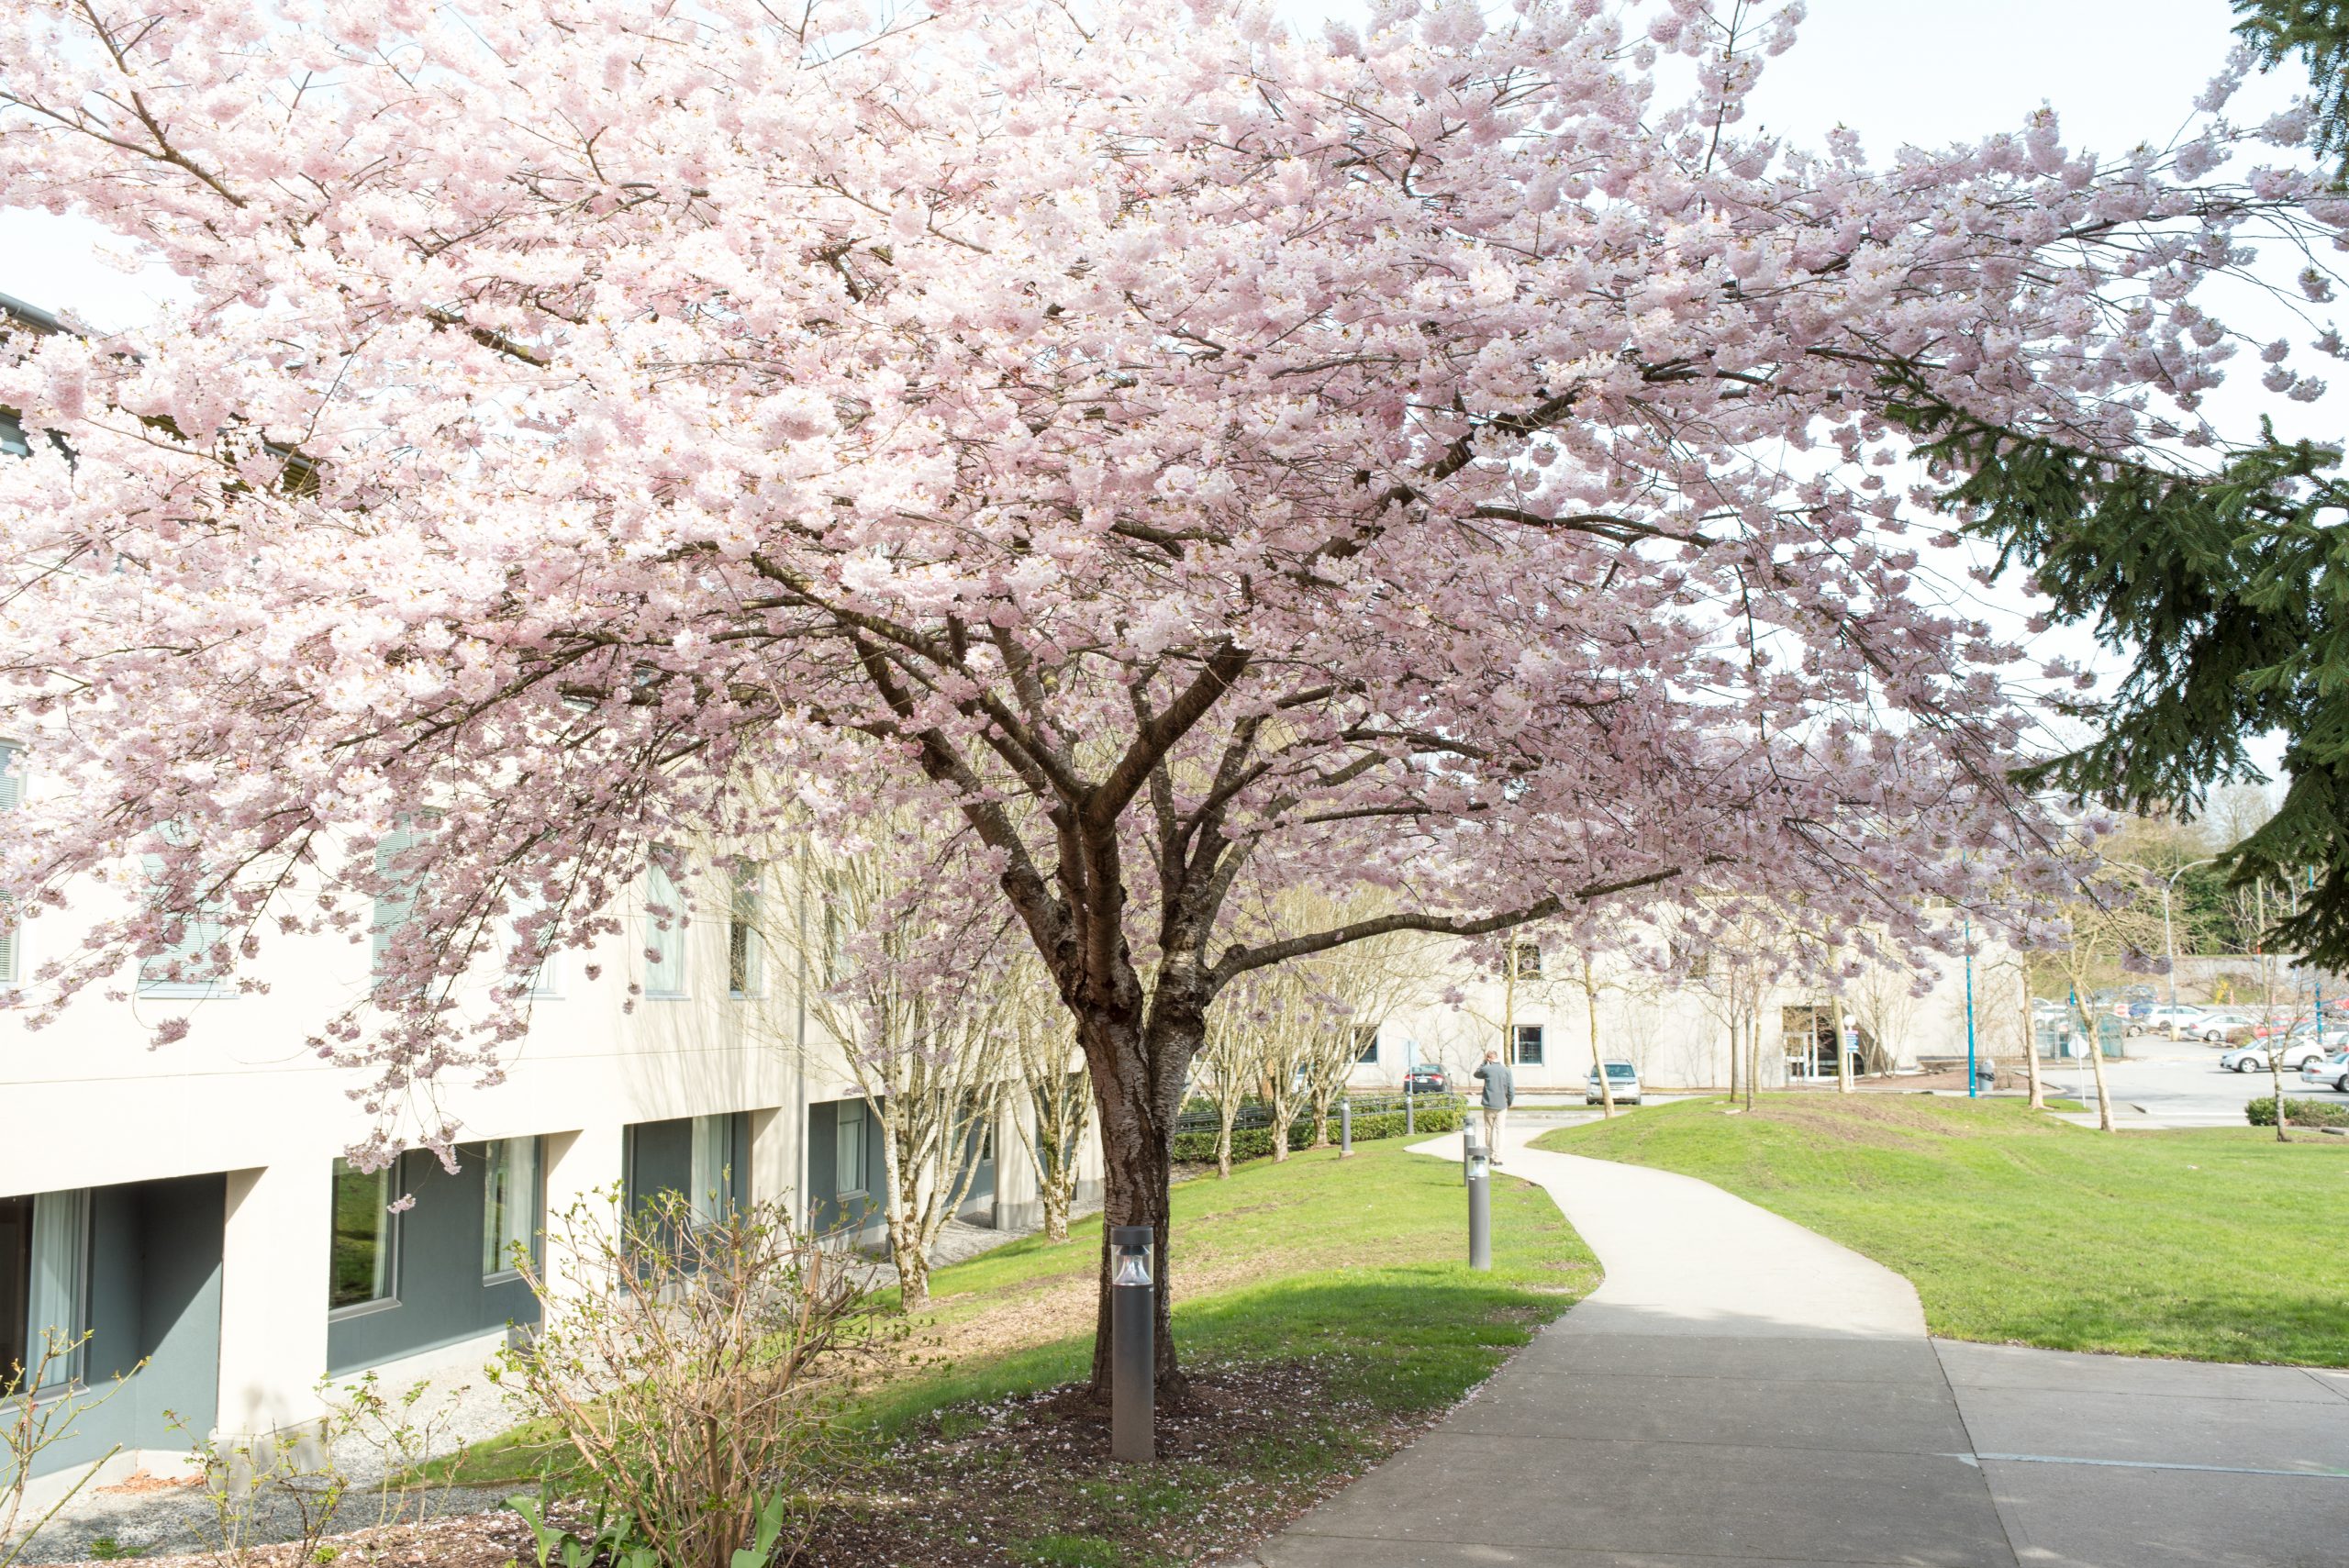 Cherry Blossoms on Campus